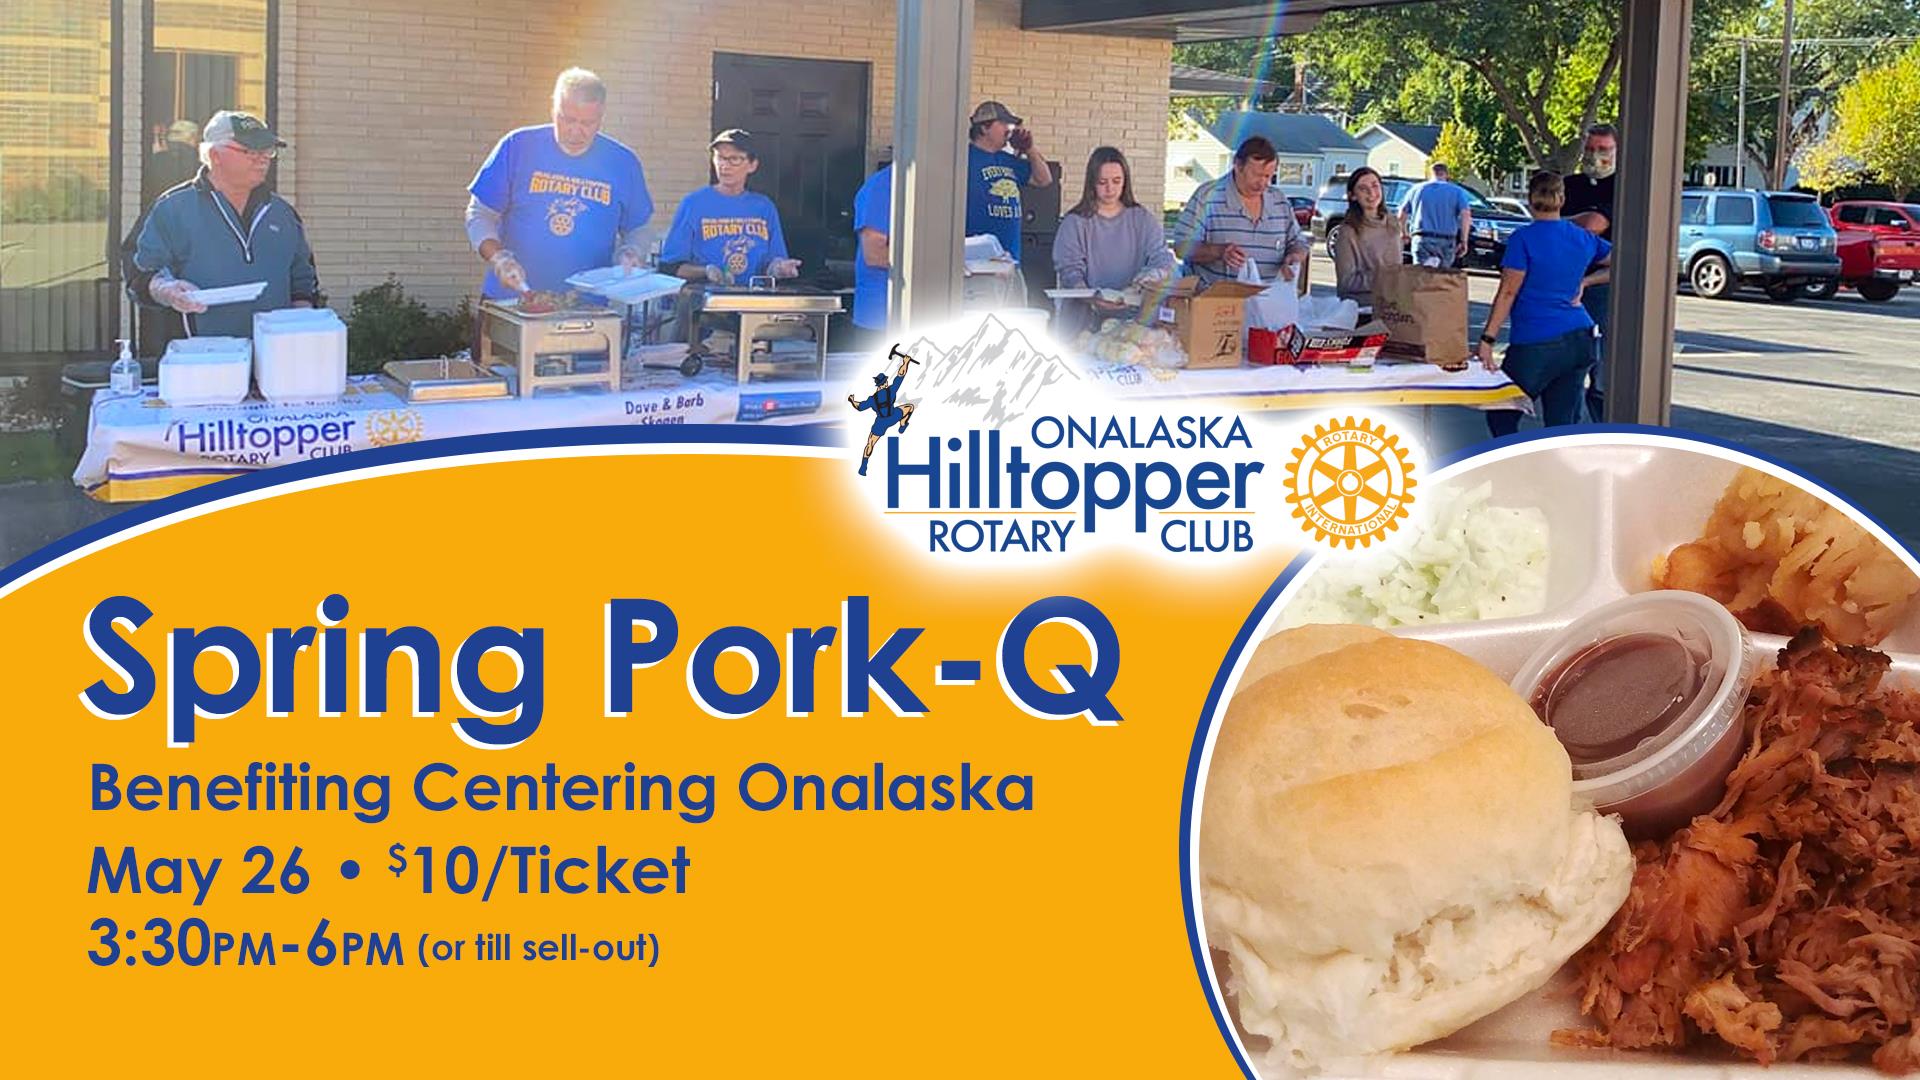 Pulled Pork-Q on May 26 - Tickets are $10 - Benefiting Centering Onalaska.